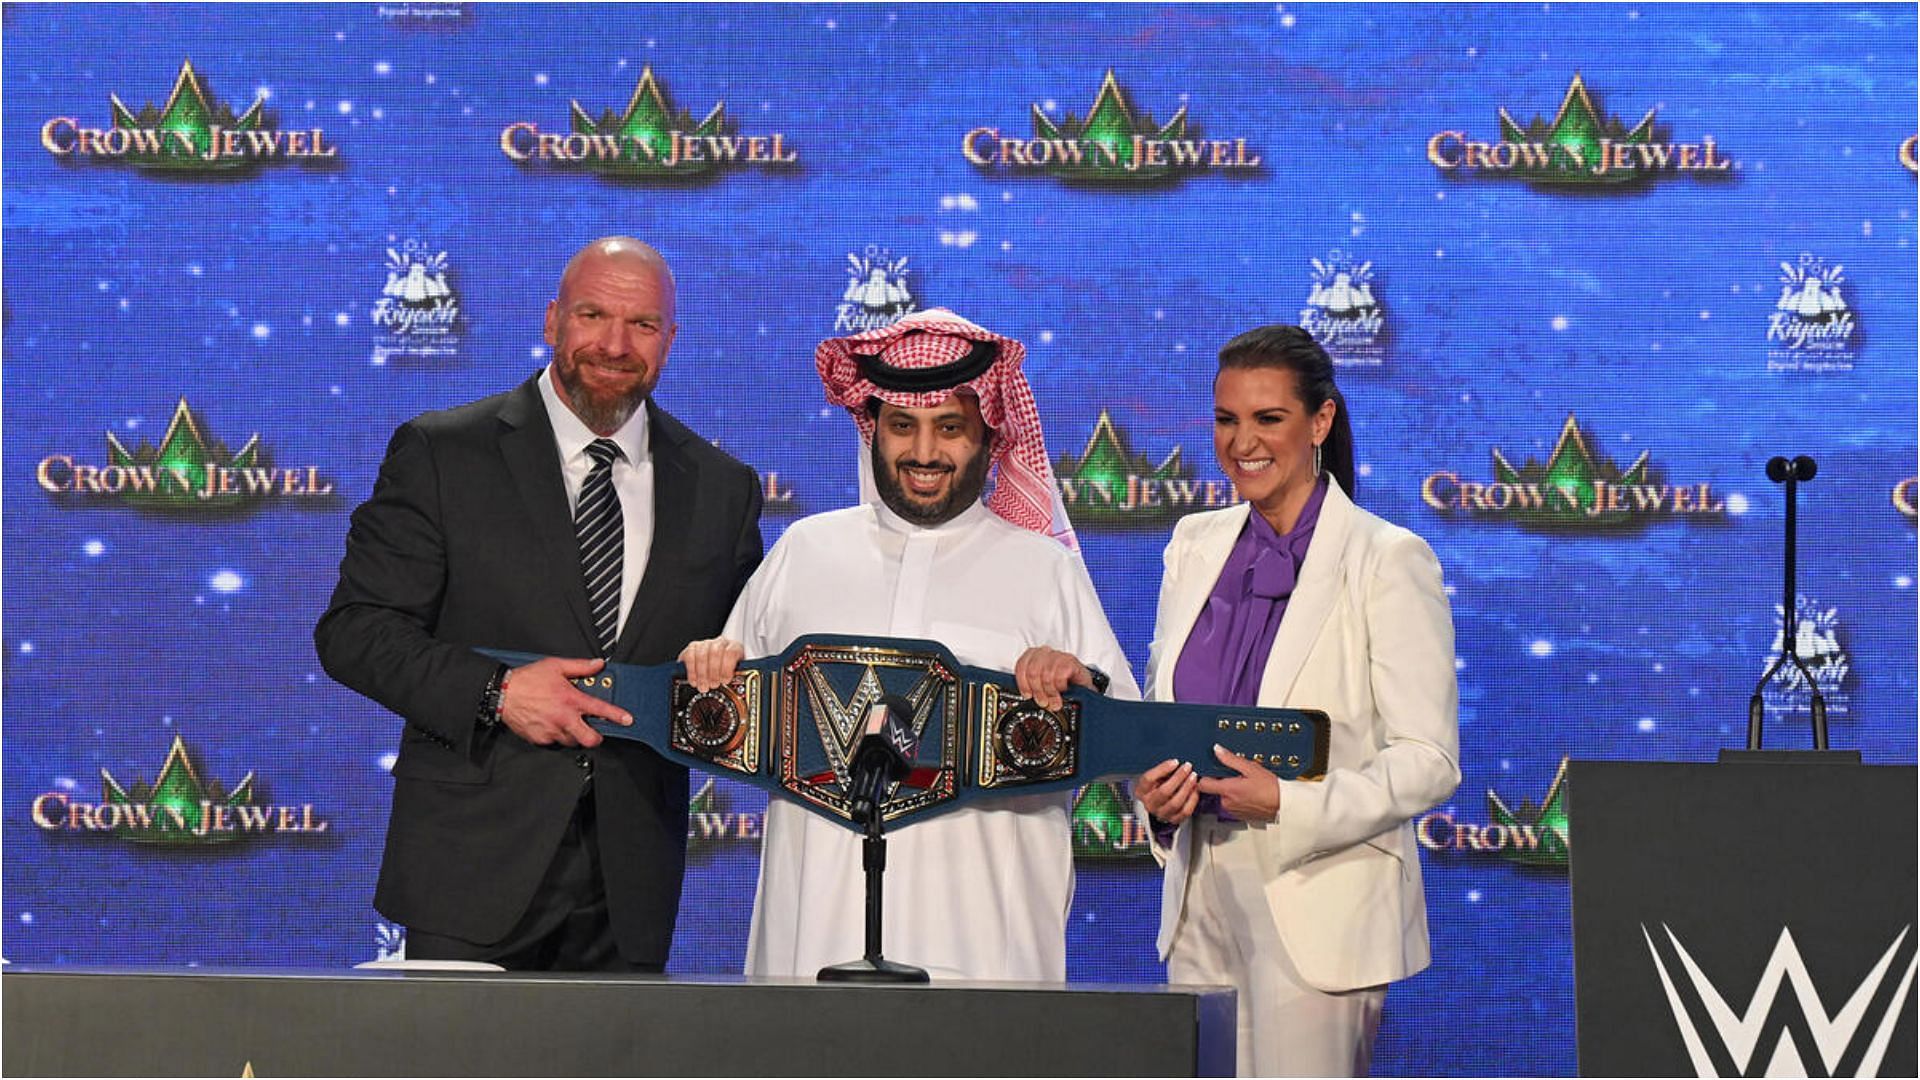 Triple H (left), Turki Alalshikh (center), and Stephanie McMahon (right) at 2022 WWE Crown Jewel conference.